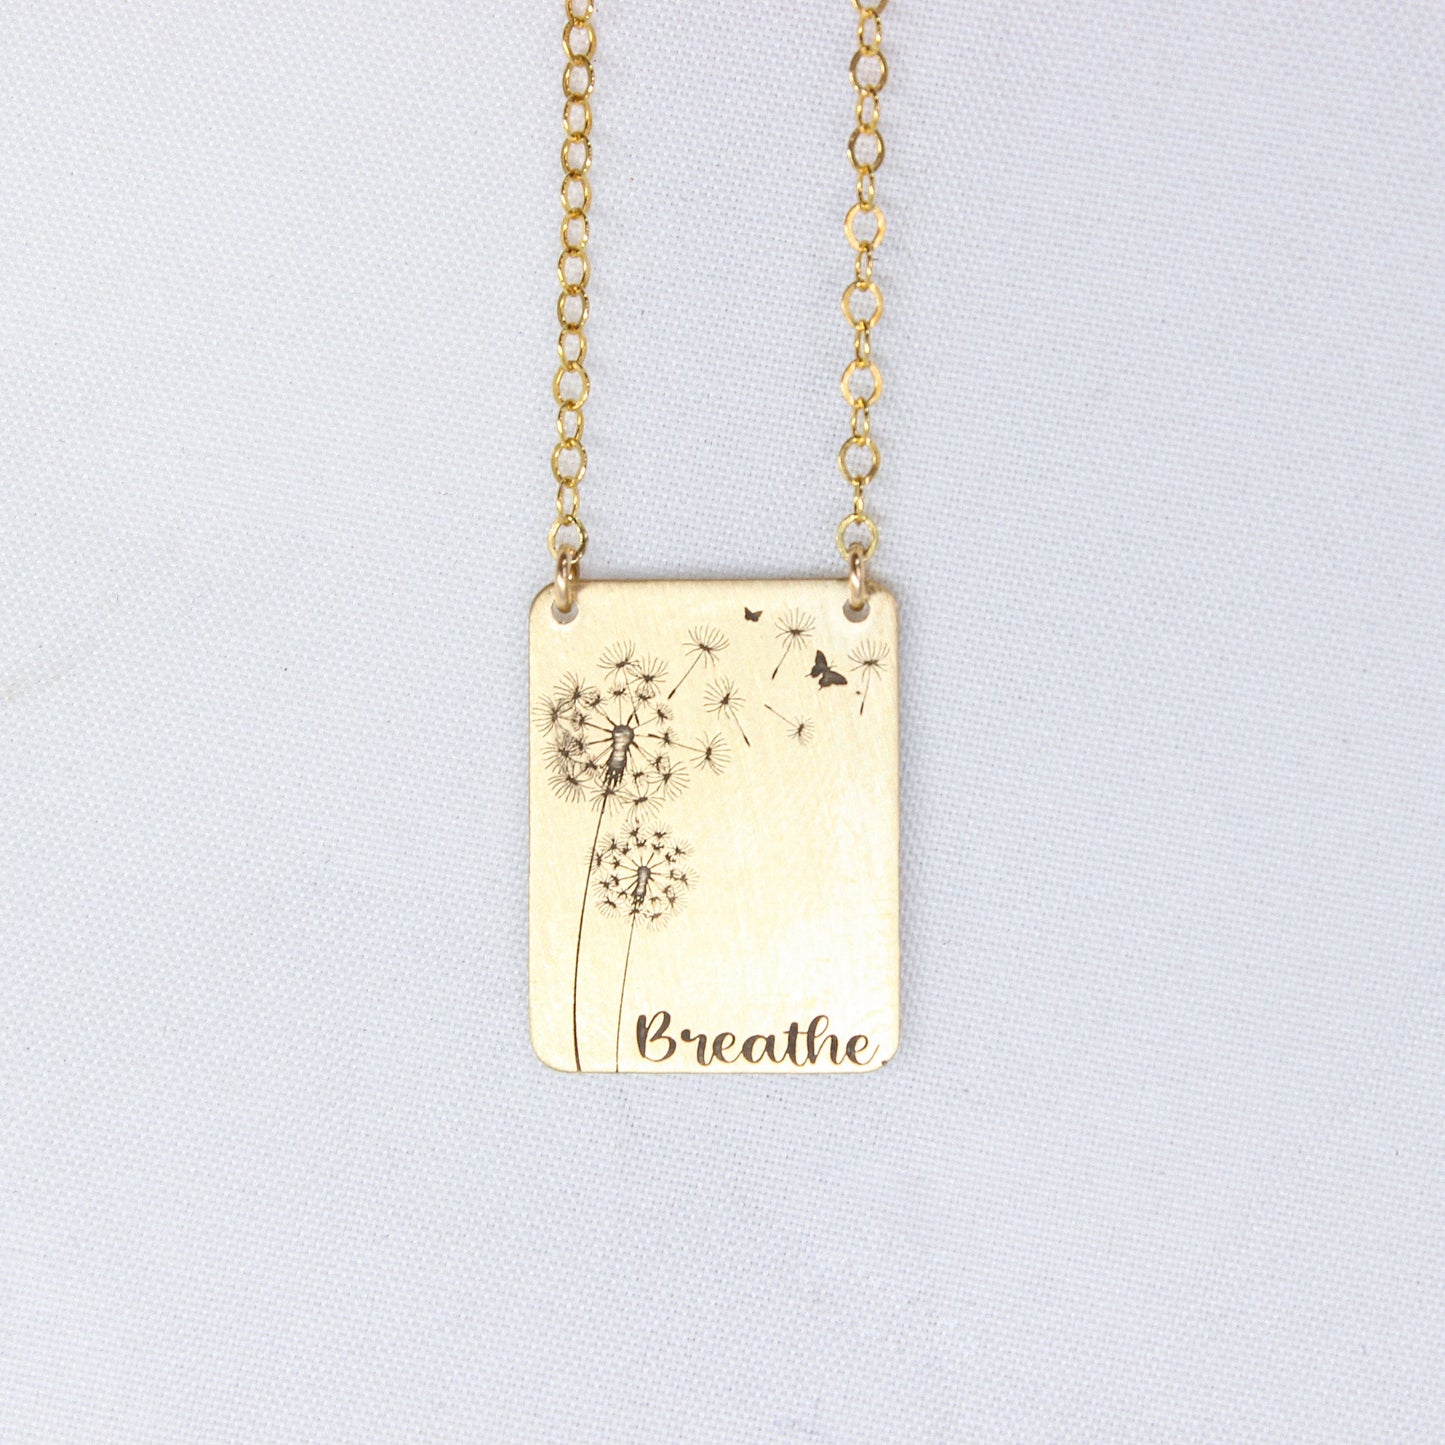 Gold Dandelion Necklace // Personalized Gift for Women // Butterfly Necklace Gift for Mom Handmade Jewelry Unique Jewelry Gift for Her